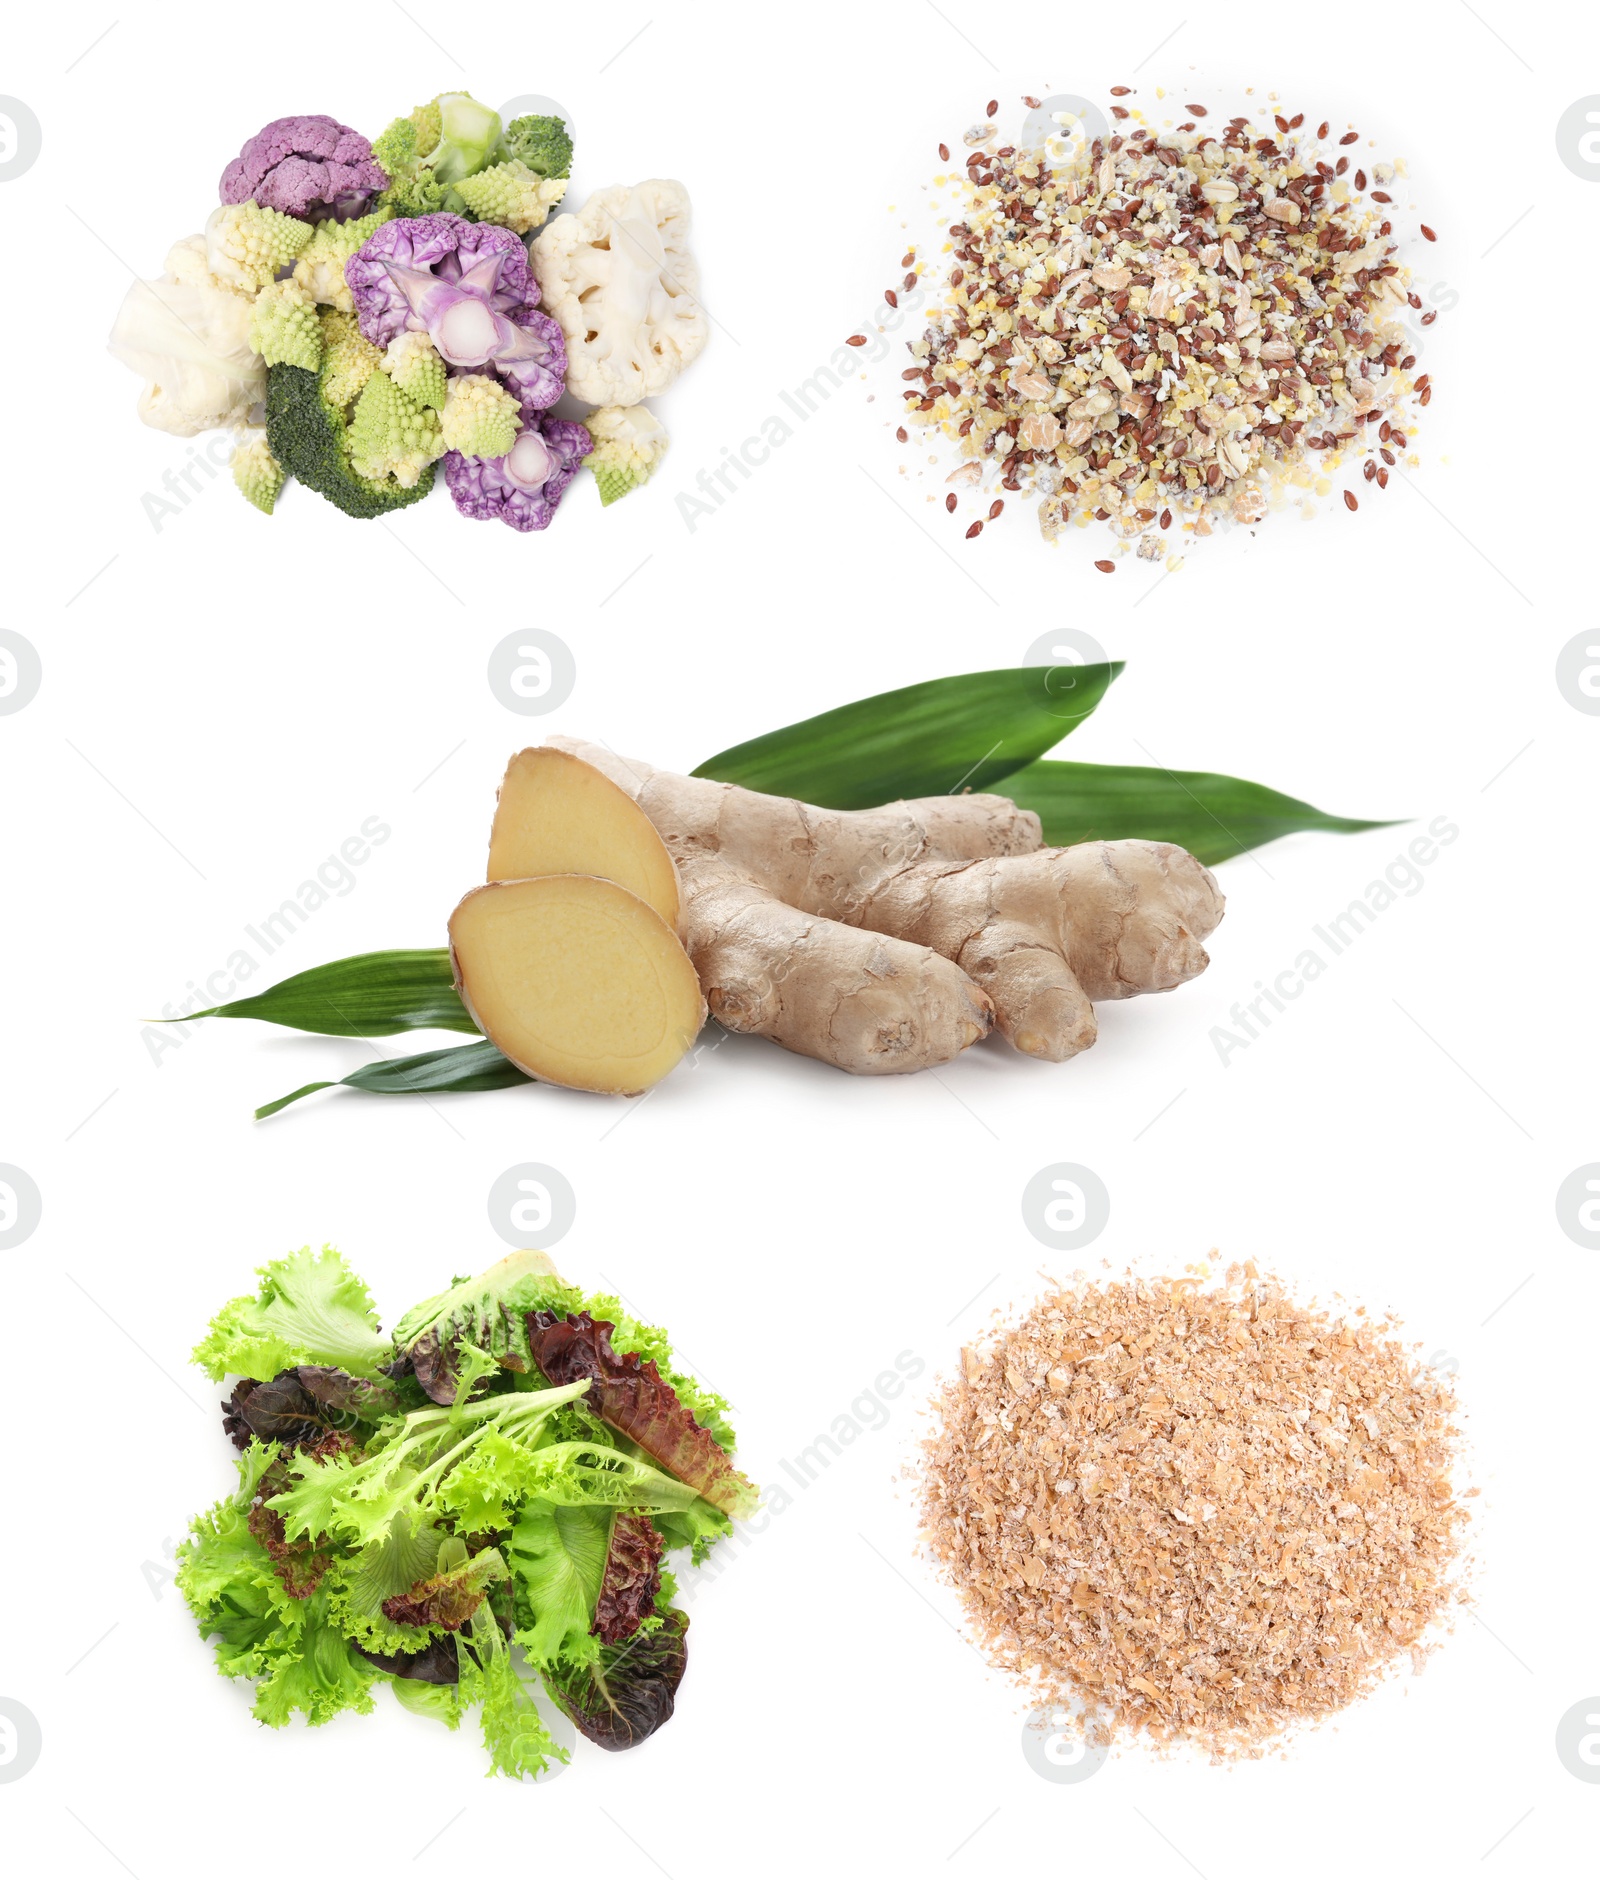 Image of Cauliflower, broccoli and other food for healthy digestion on white background